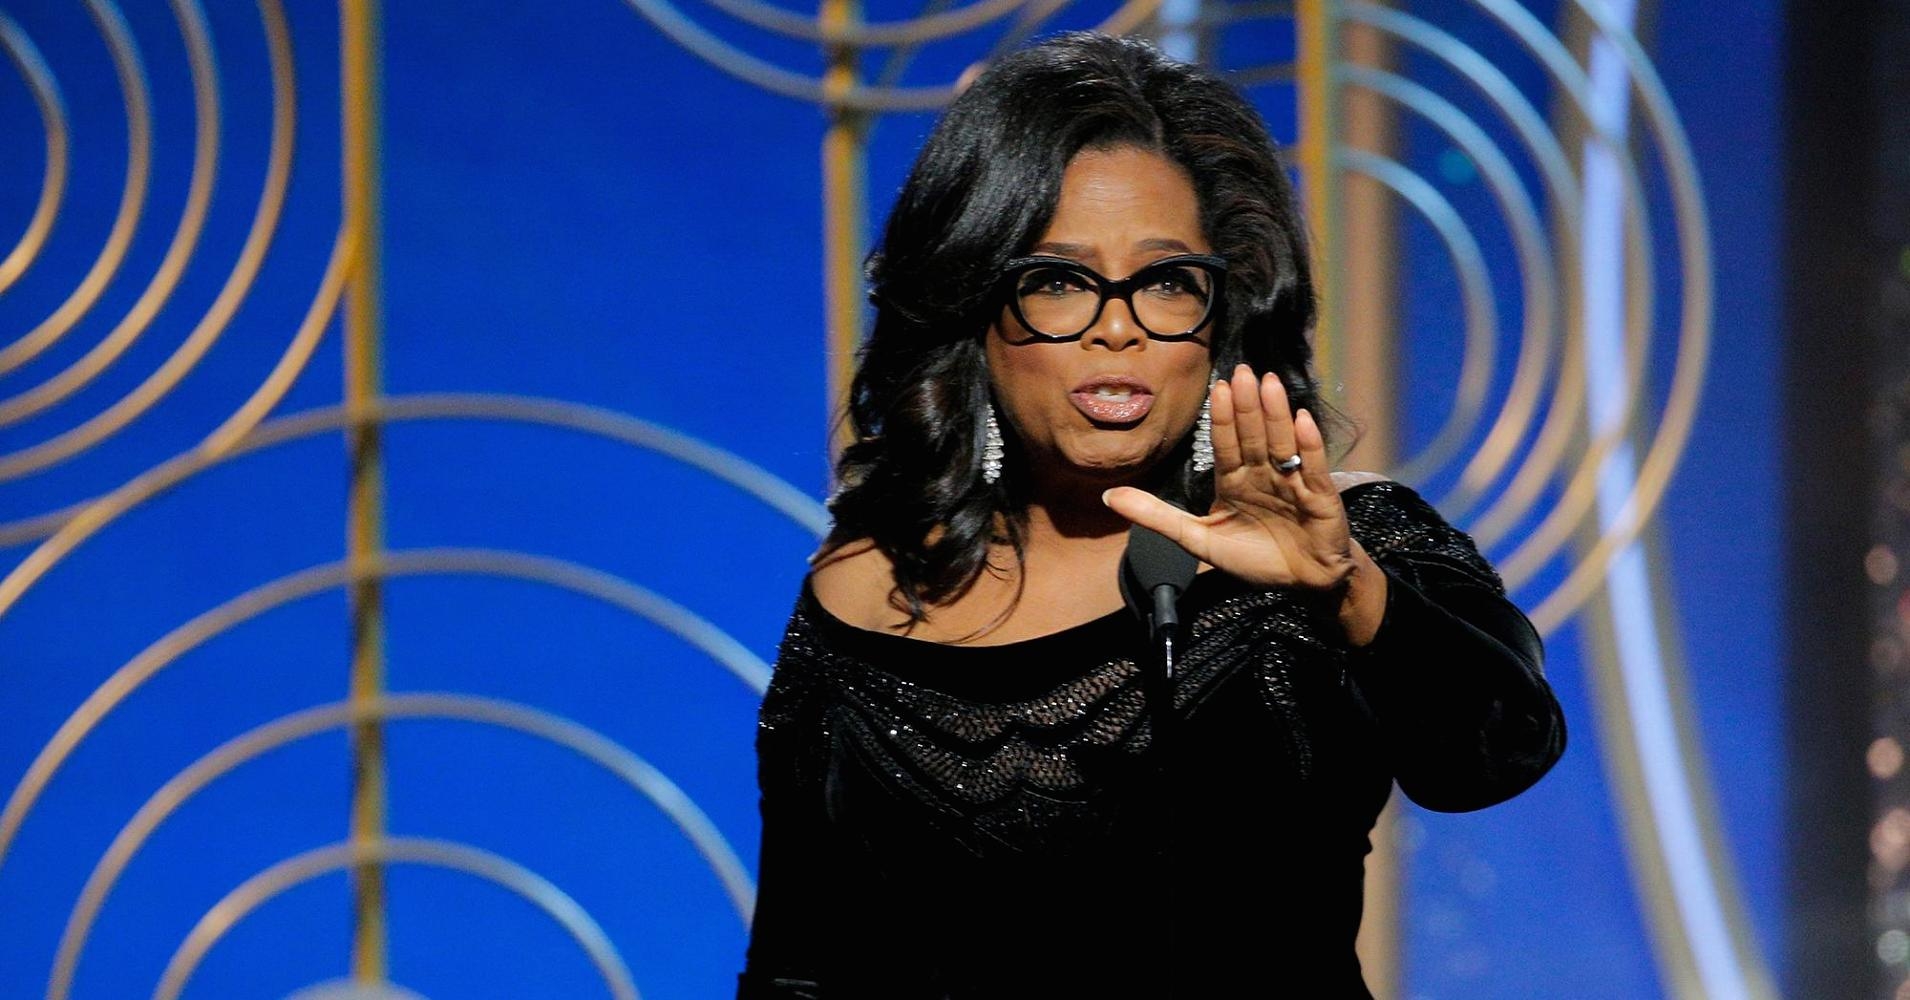 Here’s what Oprah did when she found out her male co-worker was making more money than her